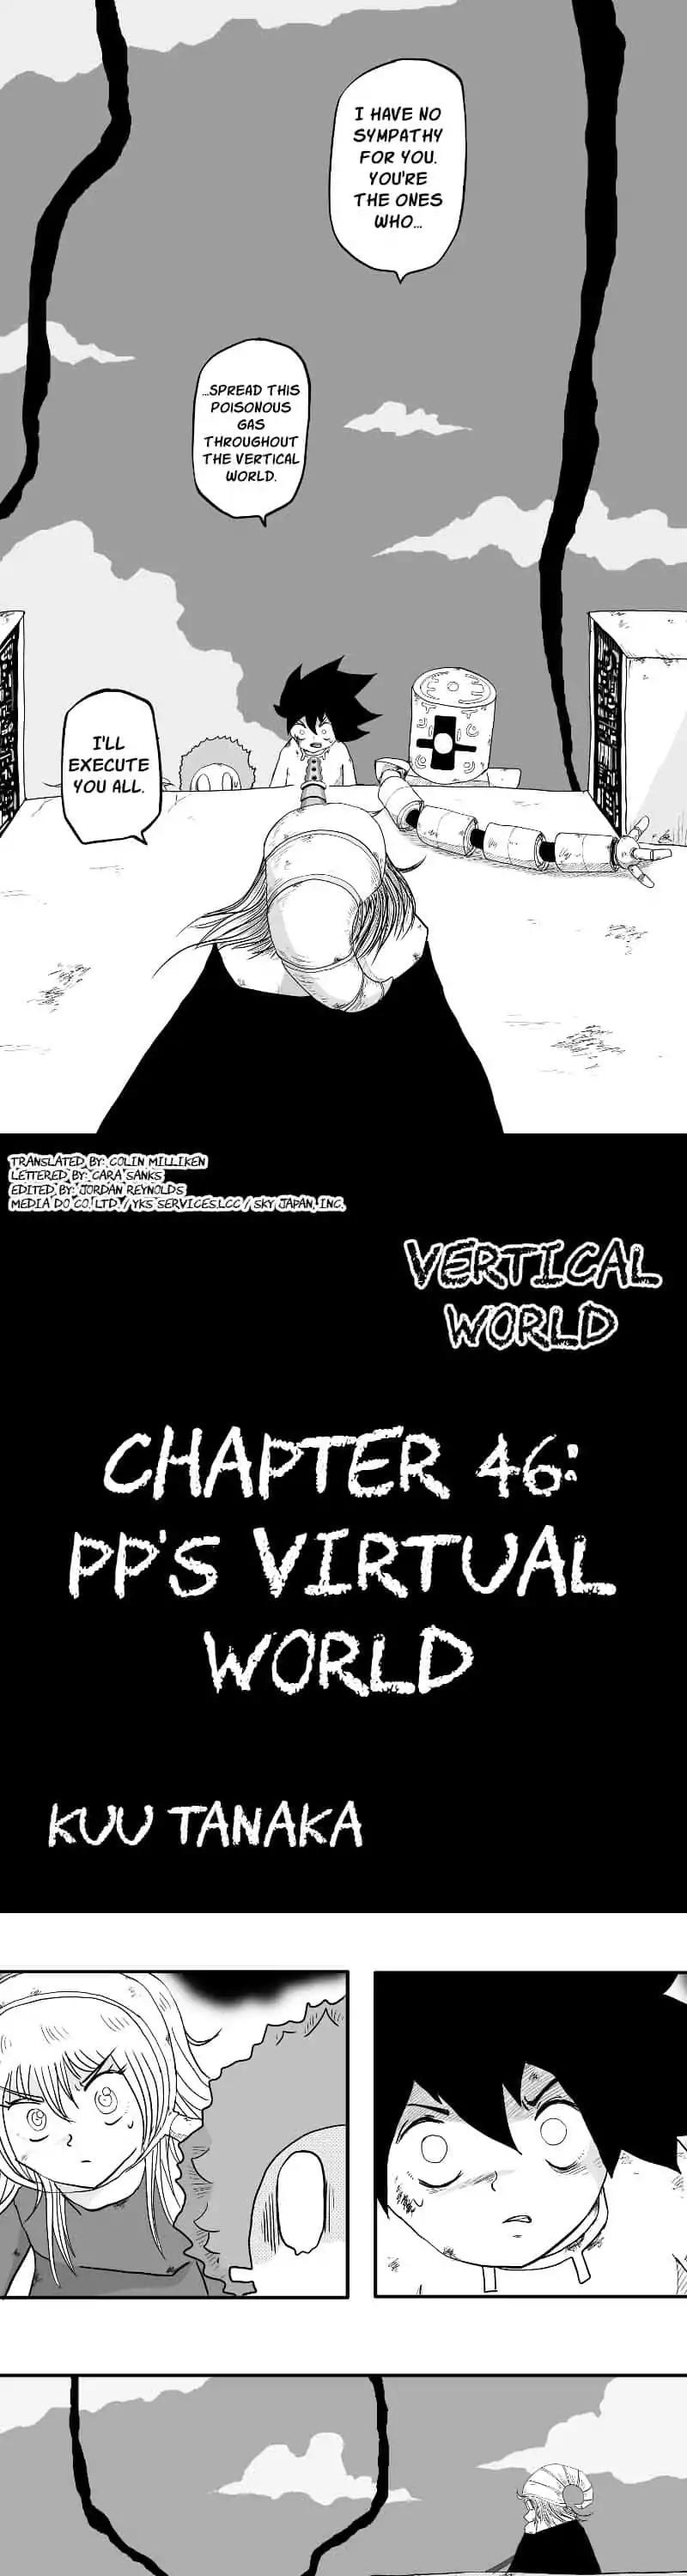 The Vertical World Chapter 46: